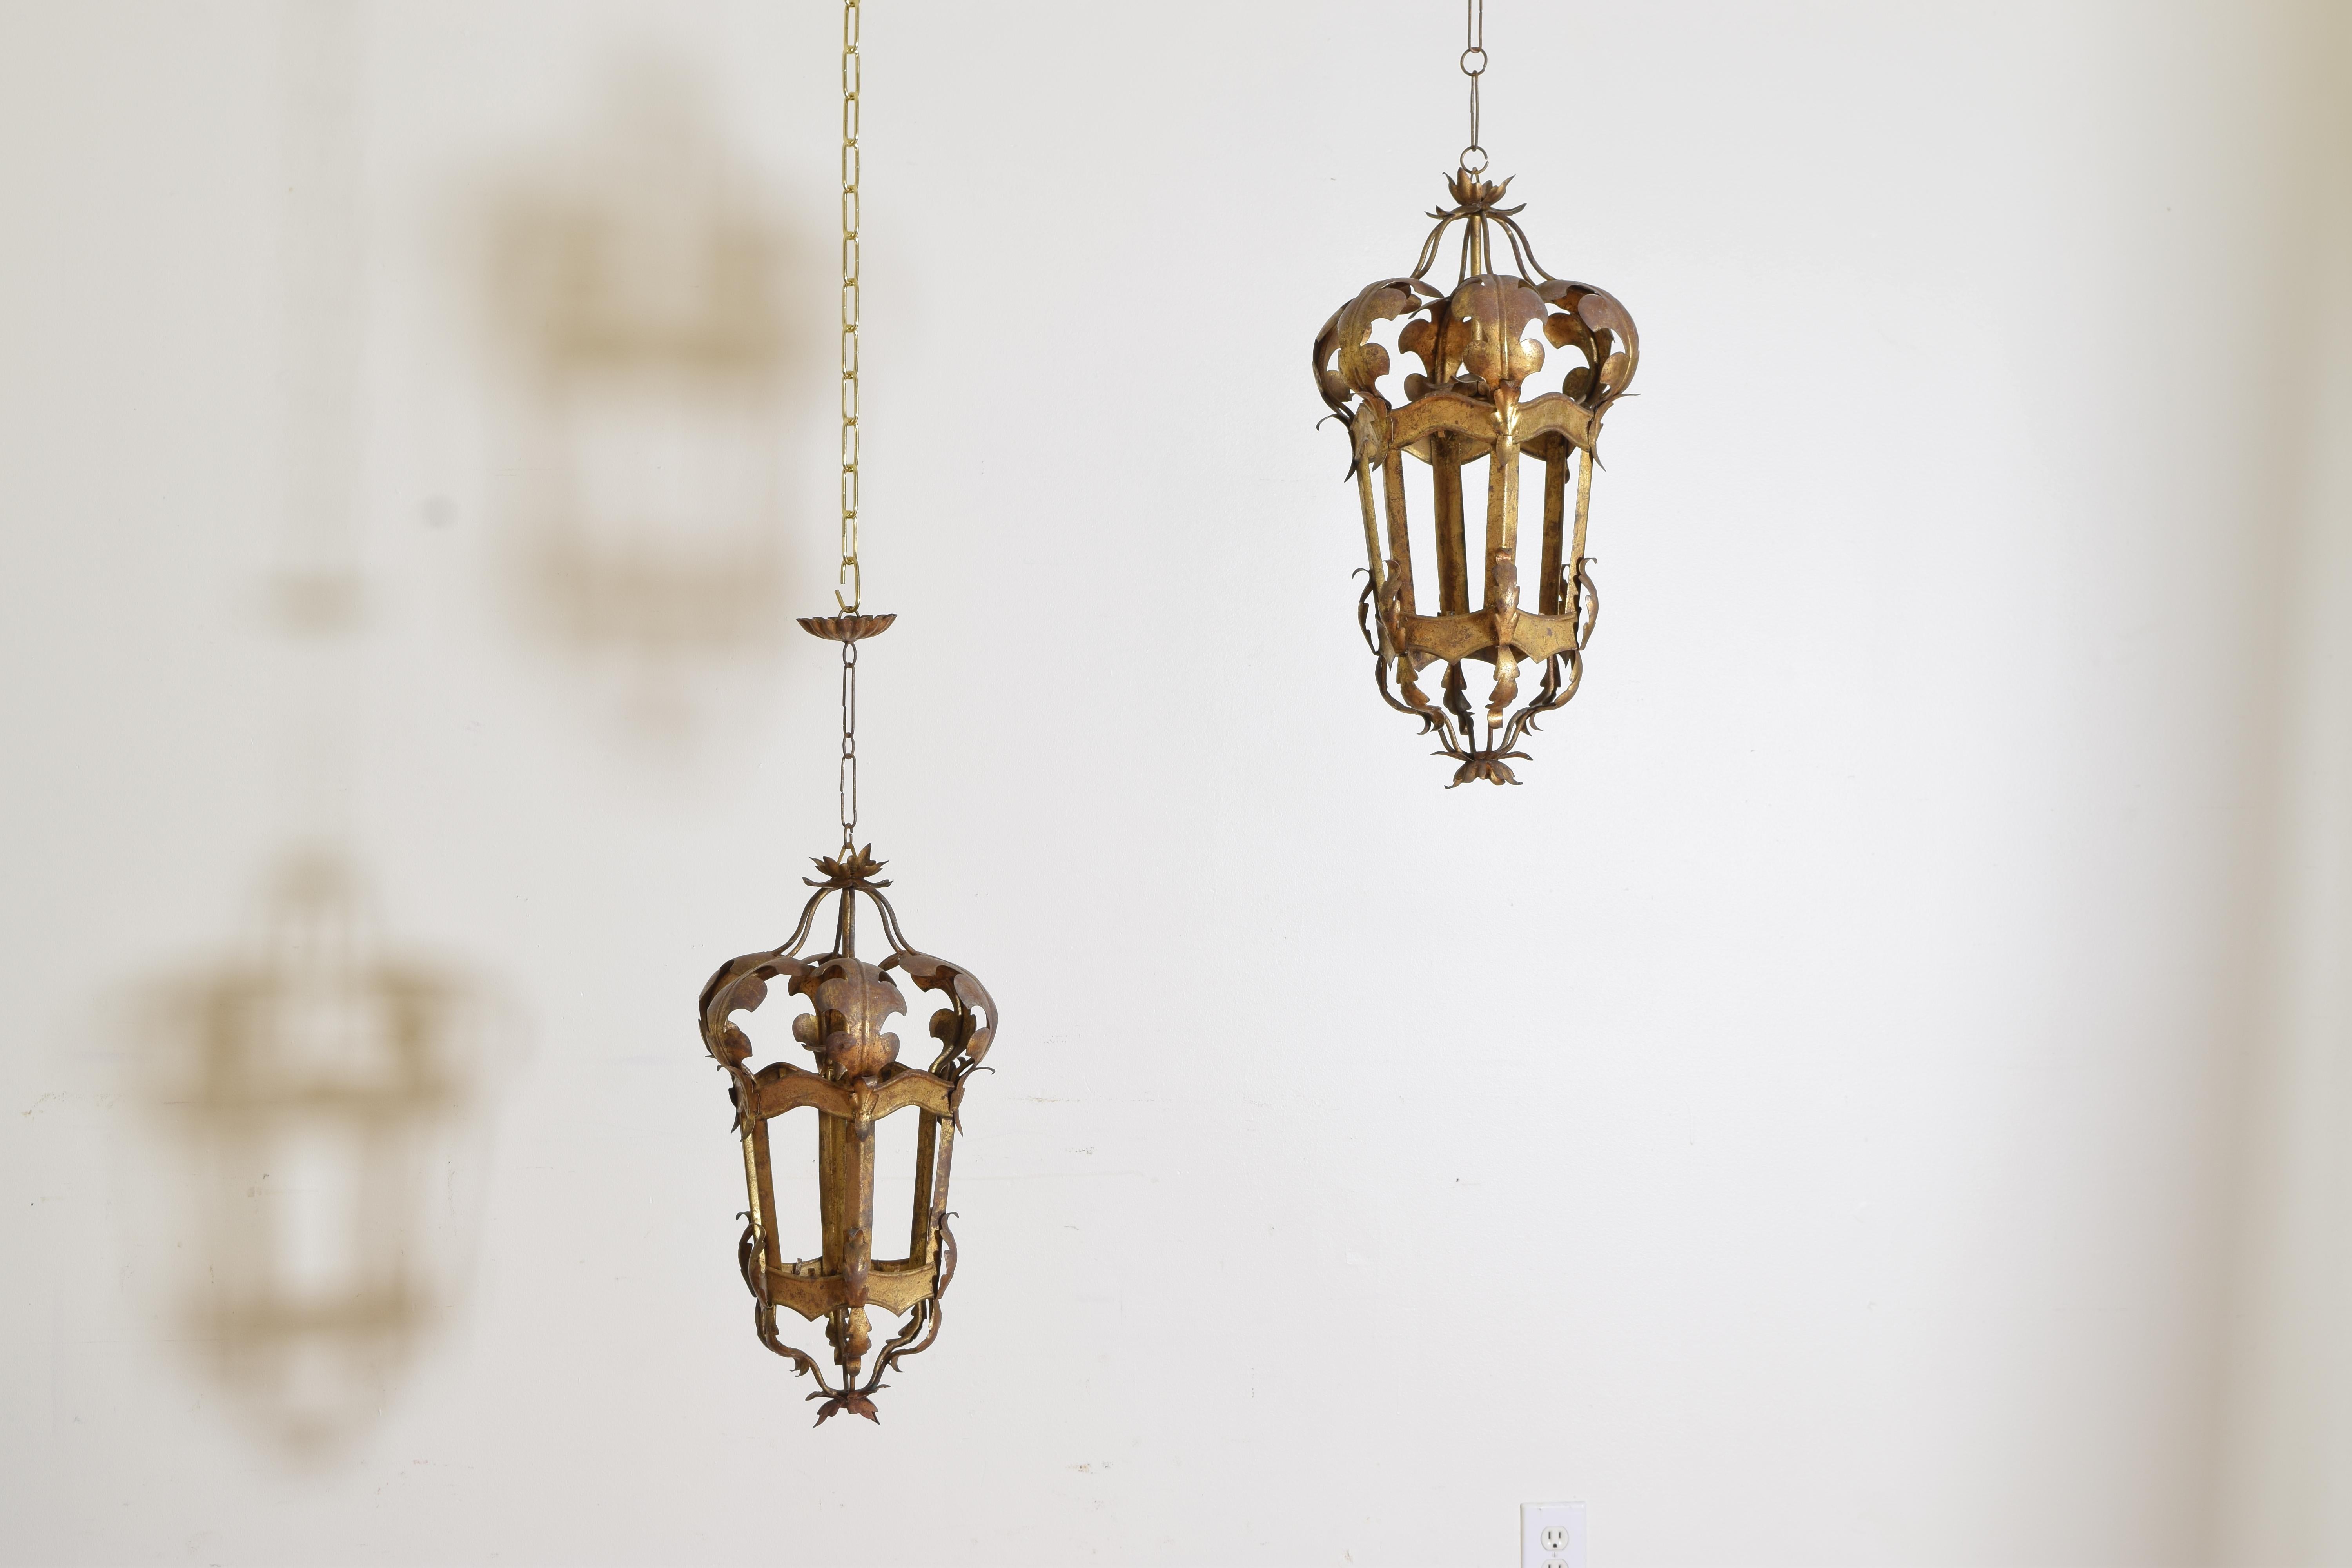 A decorative pair of Venetian-style gilt metal lanterns. The pair with bottoms ending in leaves. Having six windows with notches for glass if desired are shaped and connected to the top by bulbous shaped leaves.